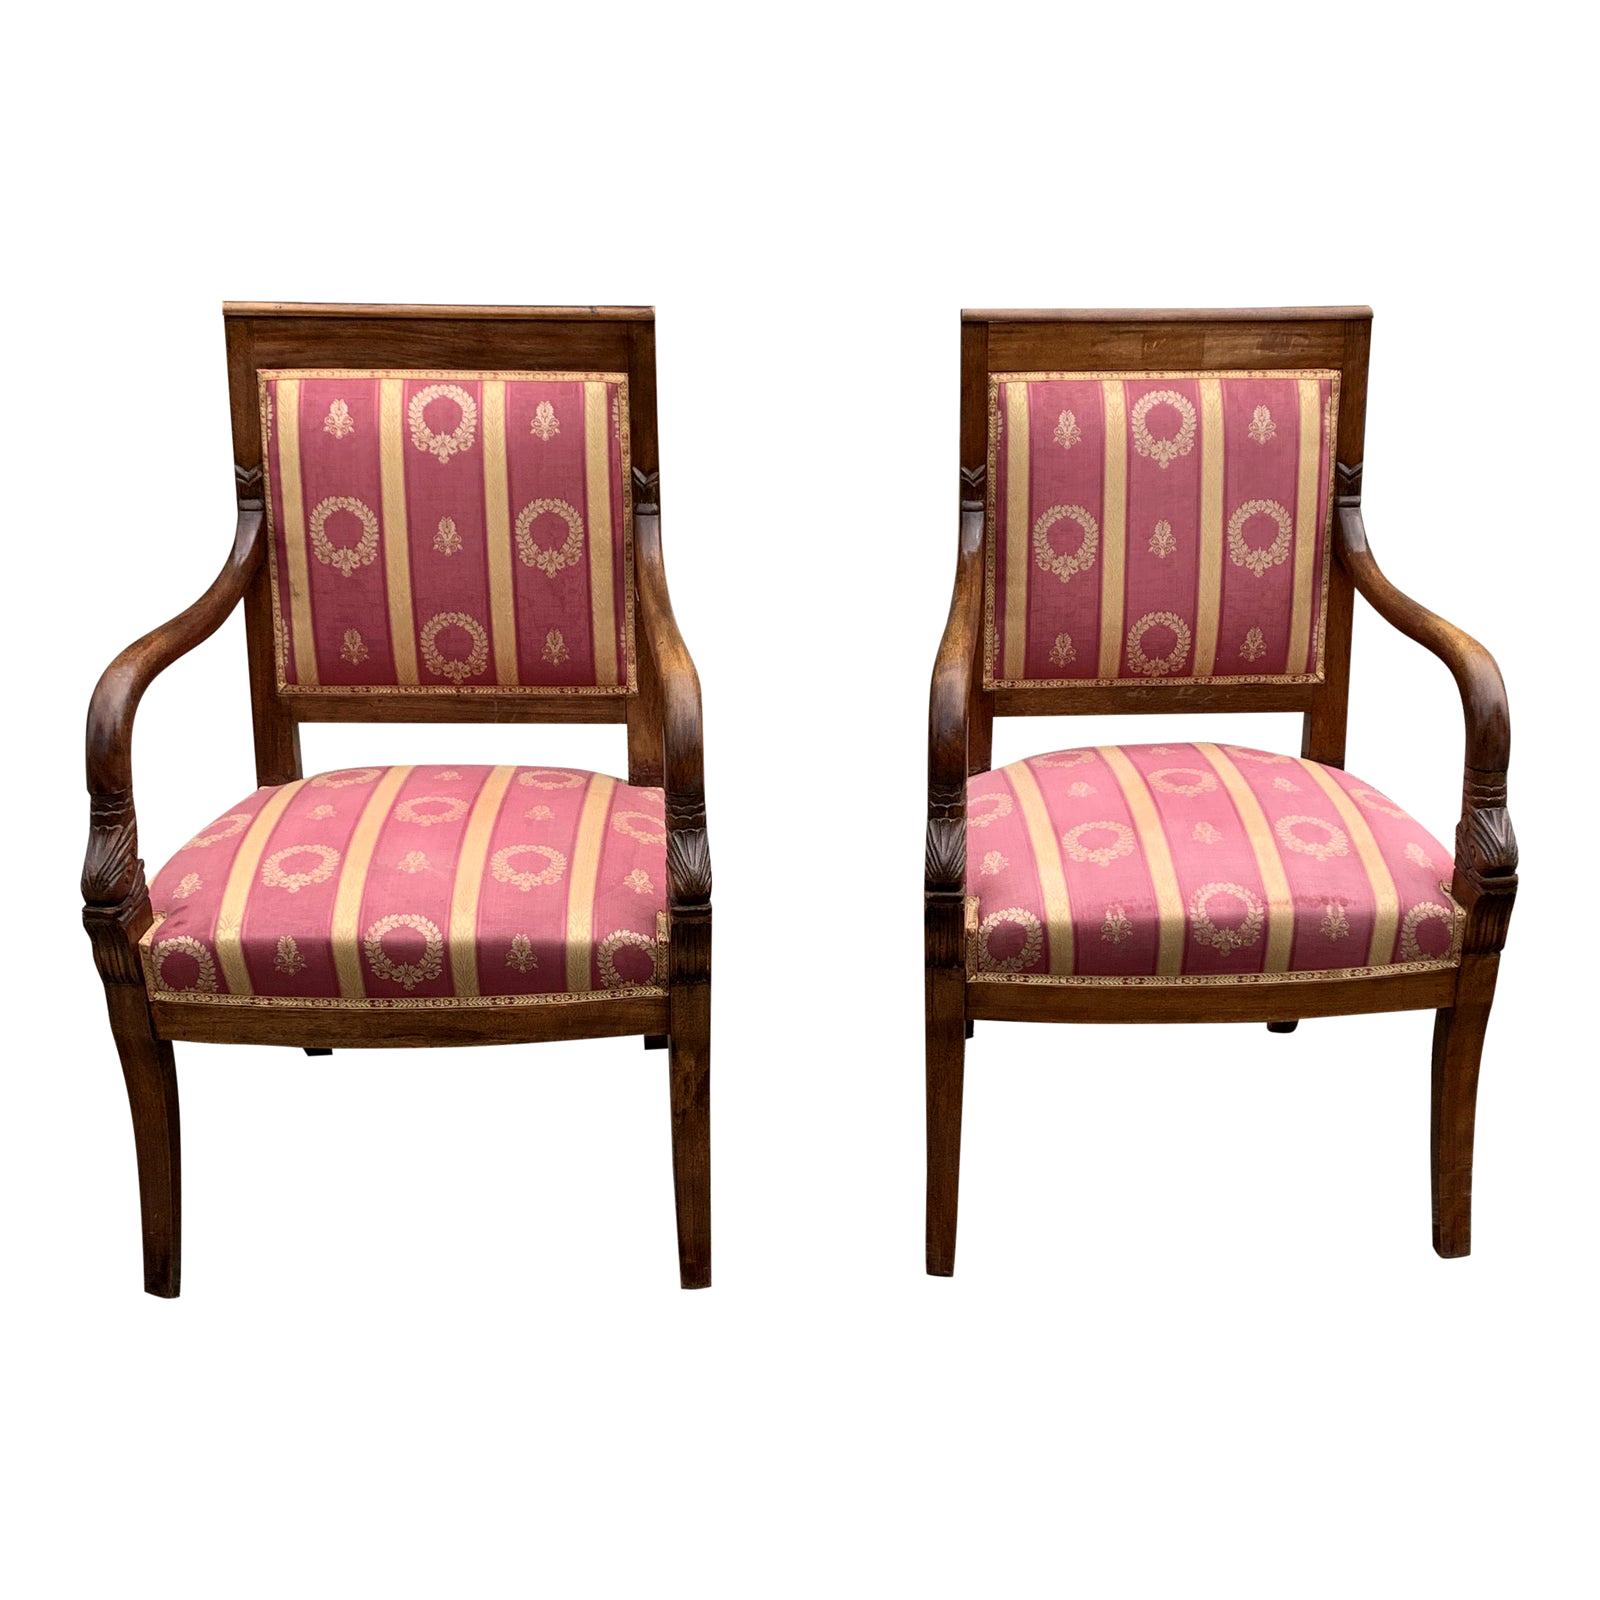 Fine Pair of French Empire Style Solid Mahogany Accent Chairs, 1900s